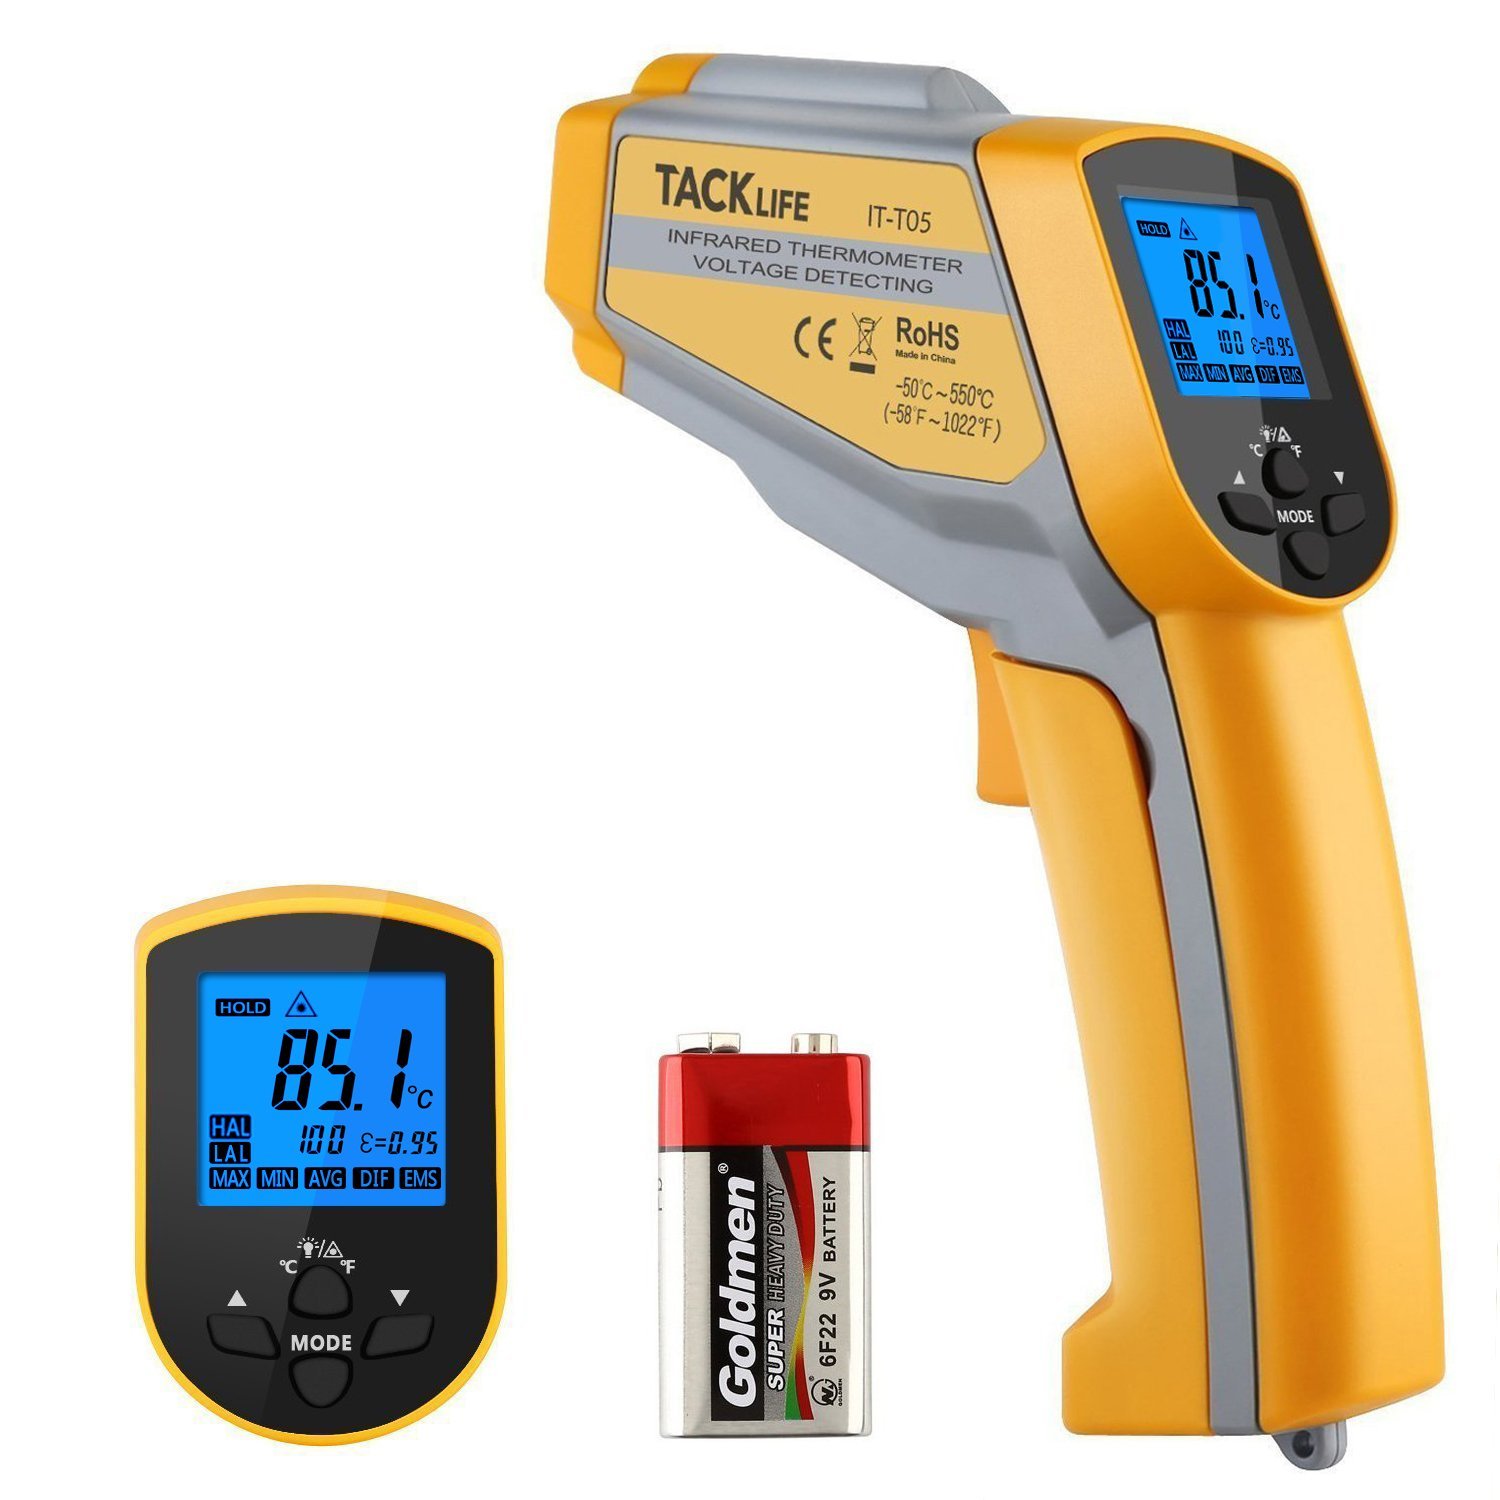 Tacklife digital infrared thermometer for $8